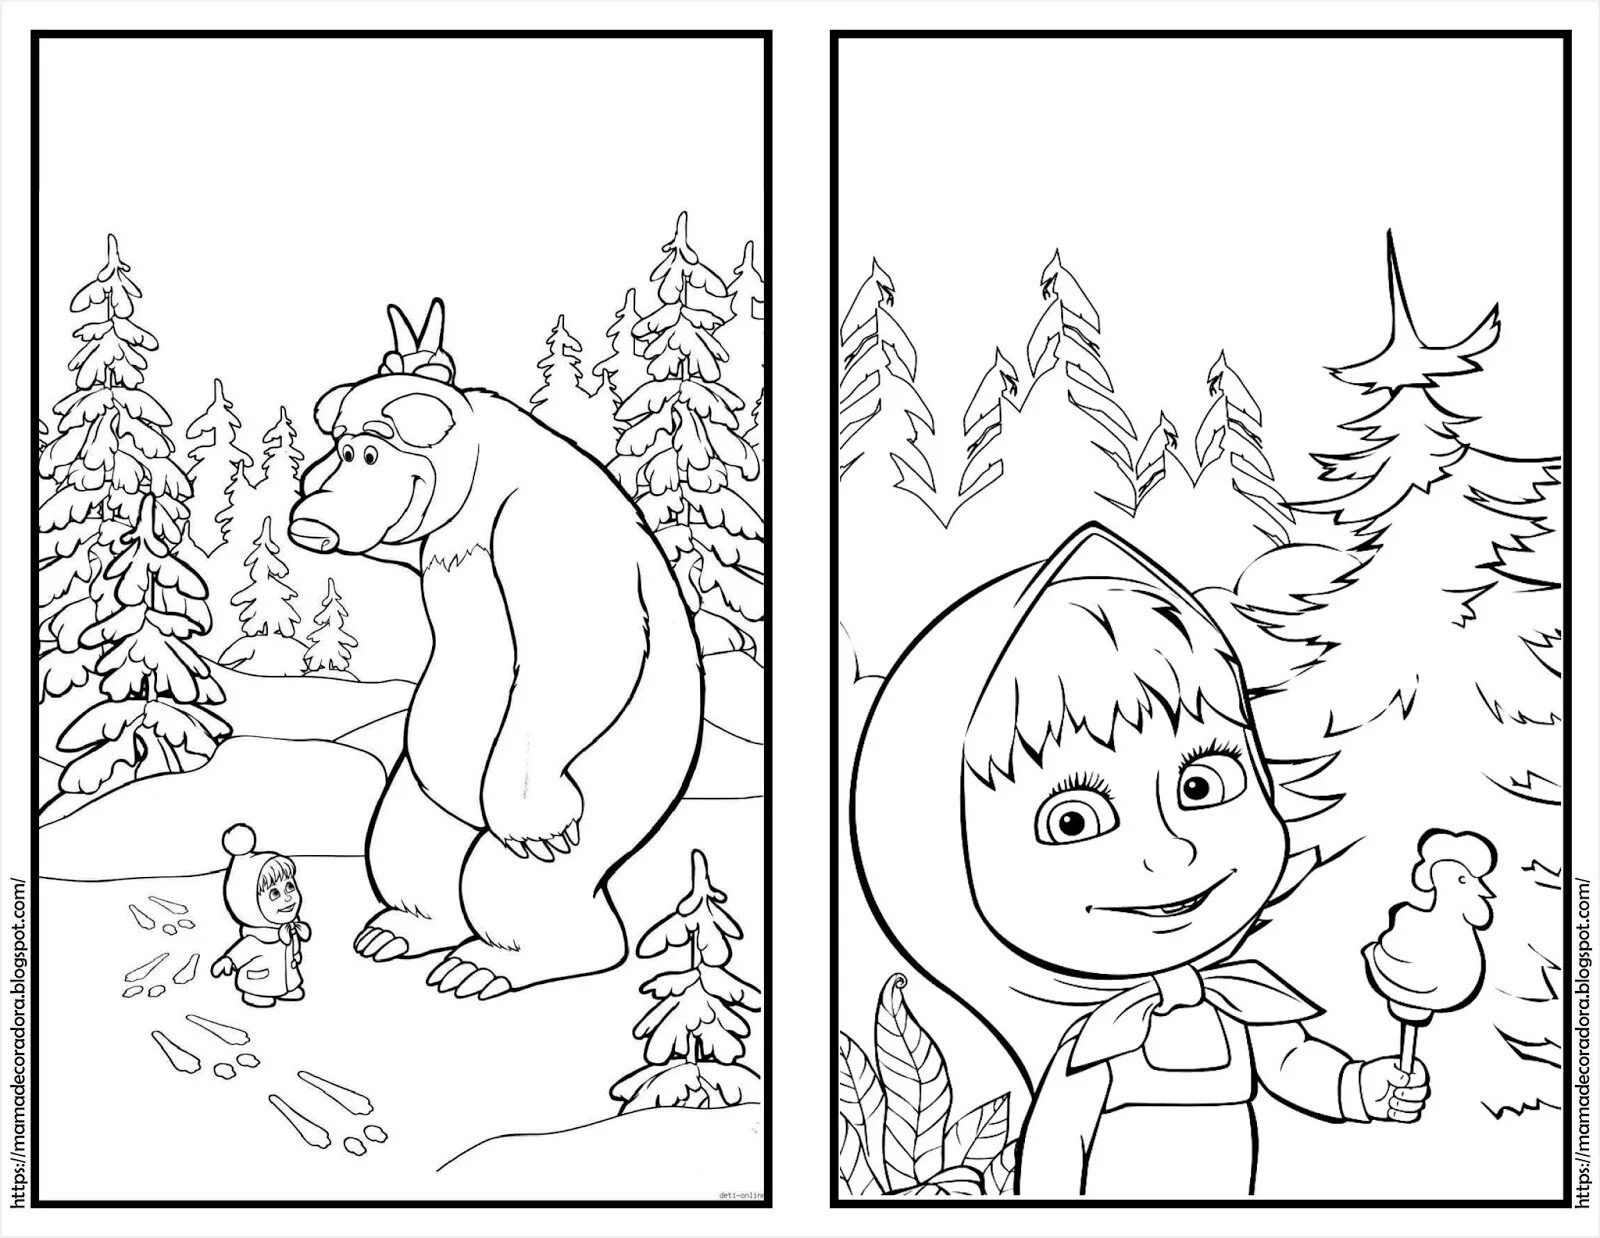 Dazzling masha and the bear coloring book